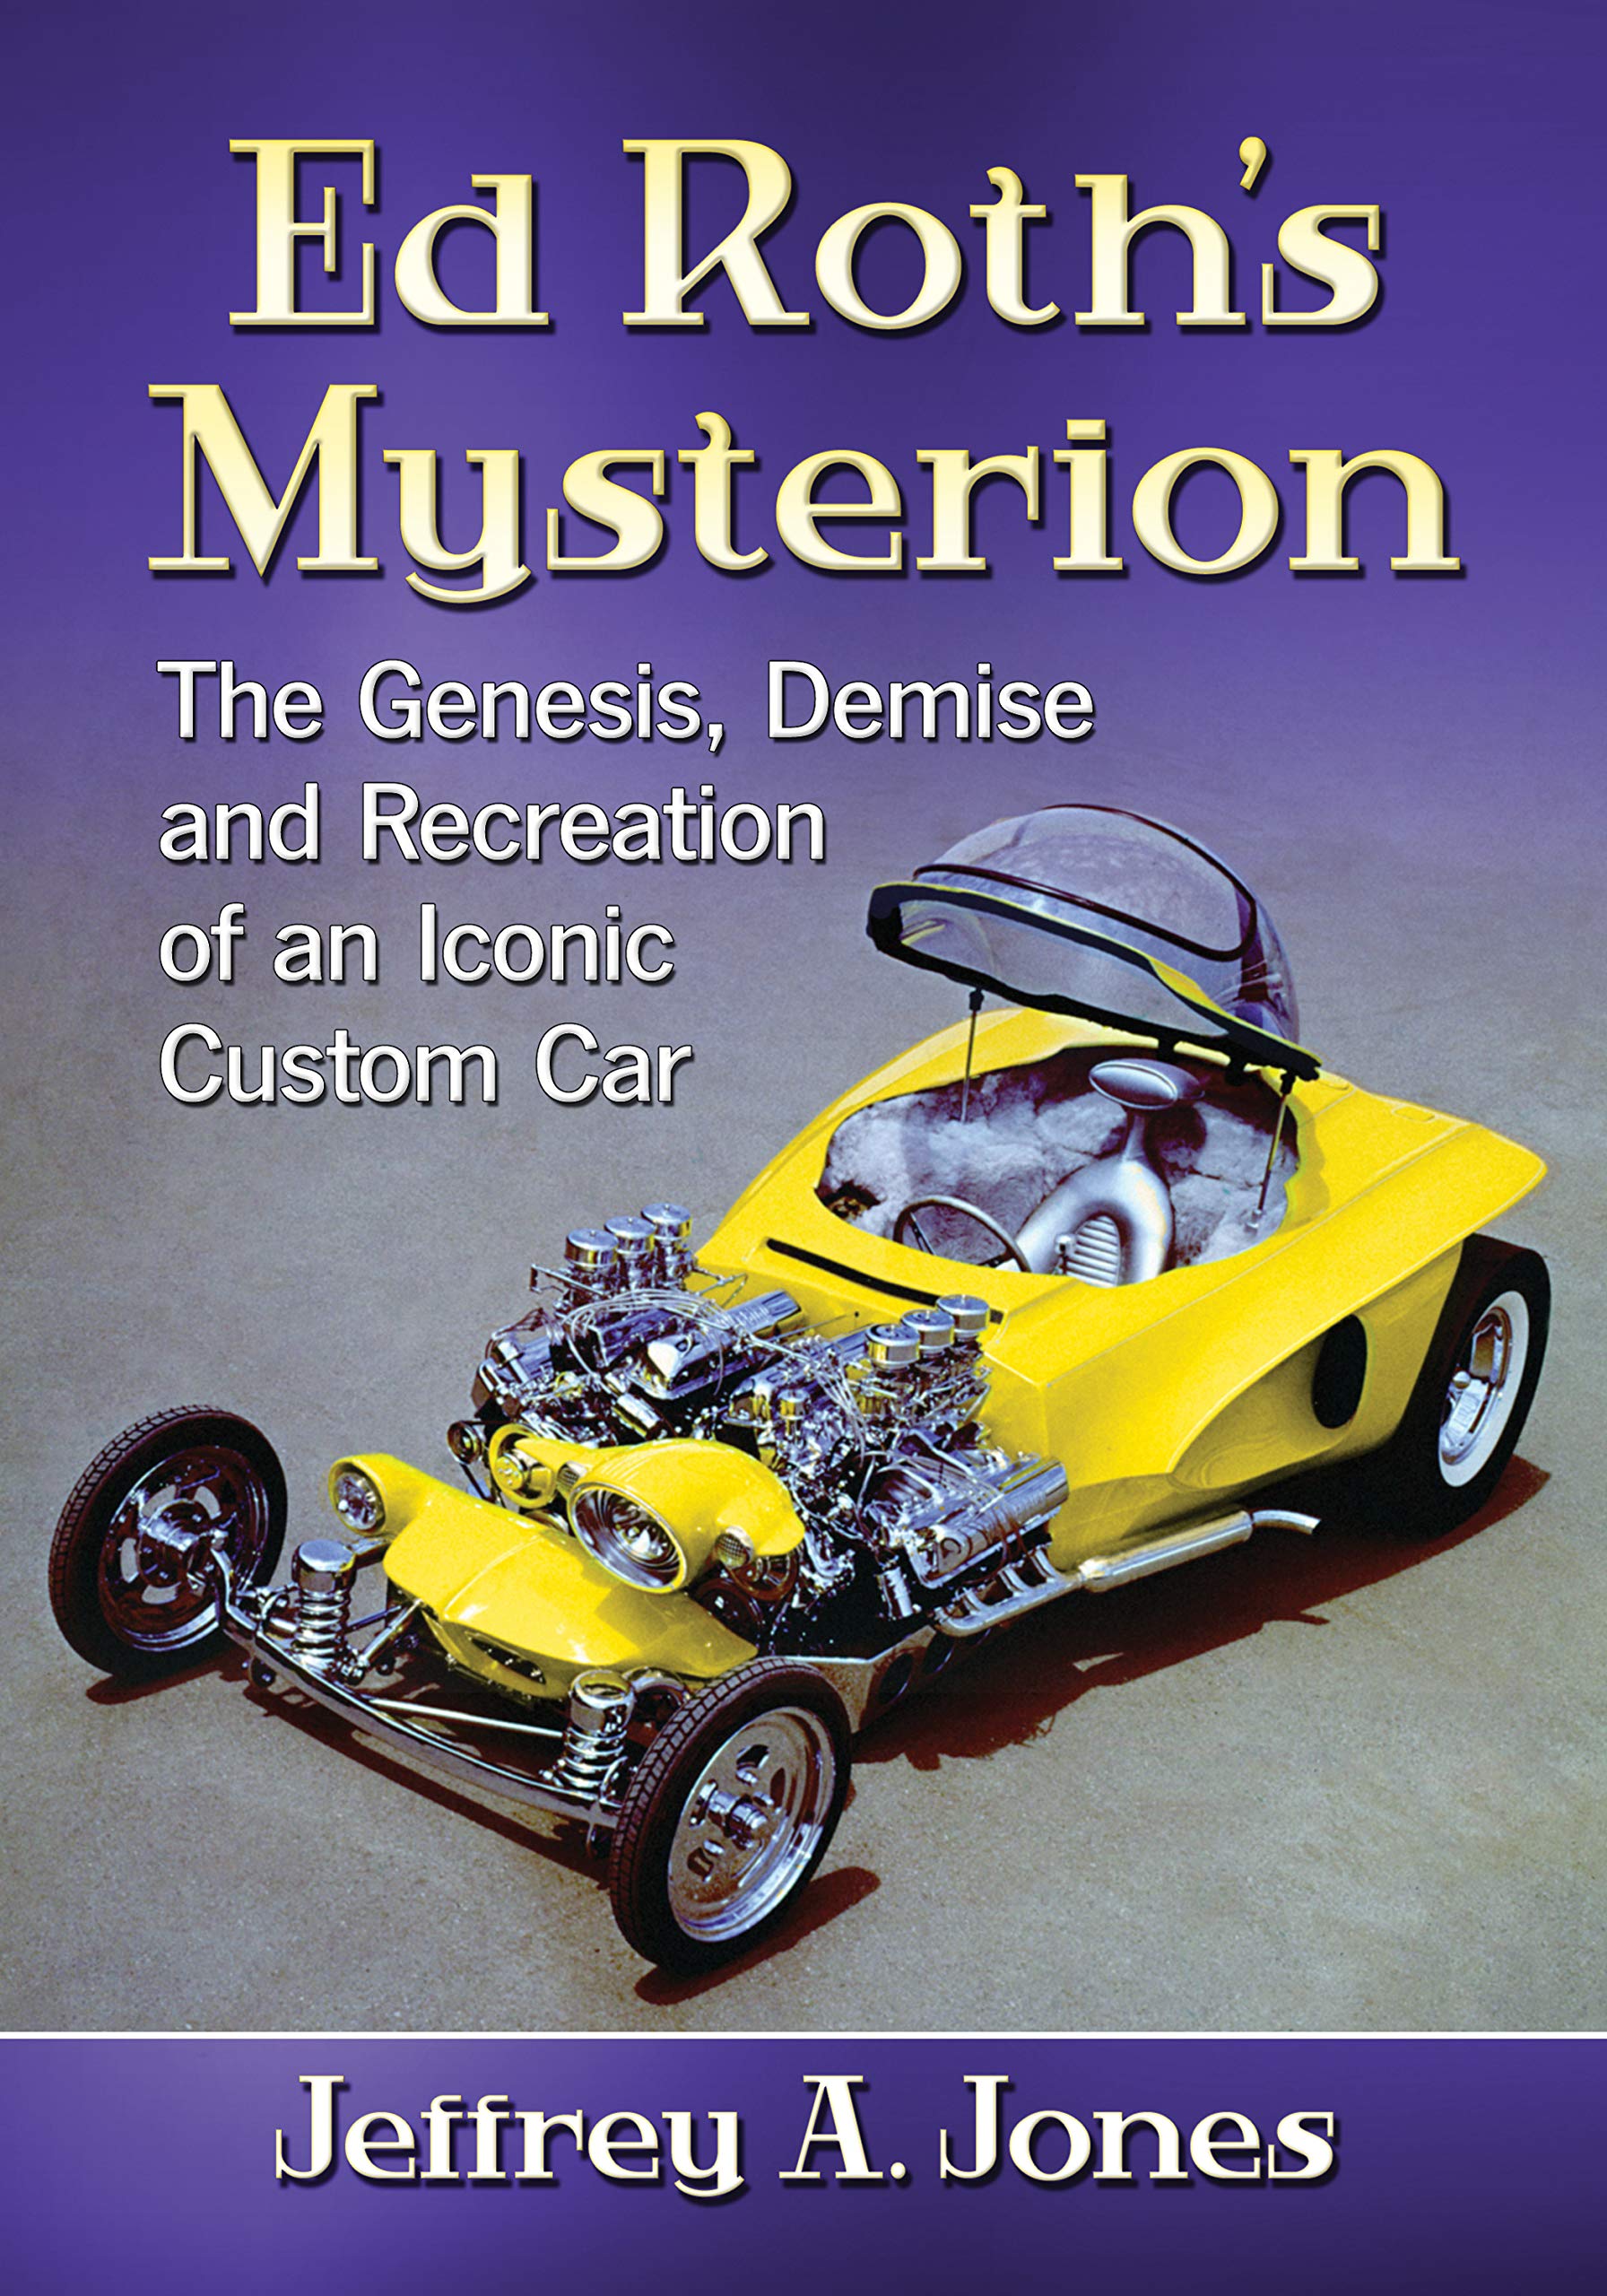 Ed Roth's Mysterion: The Genesis, Demise and Recreation of an Iconic Custom Car